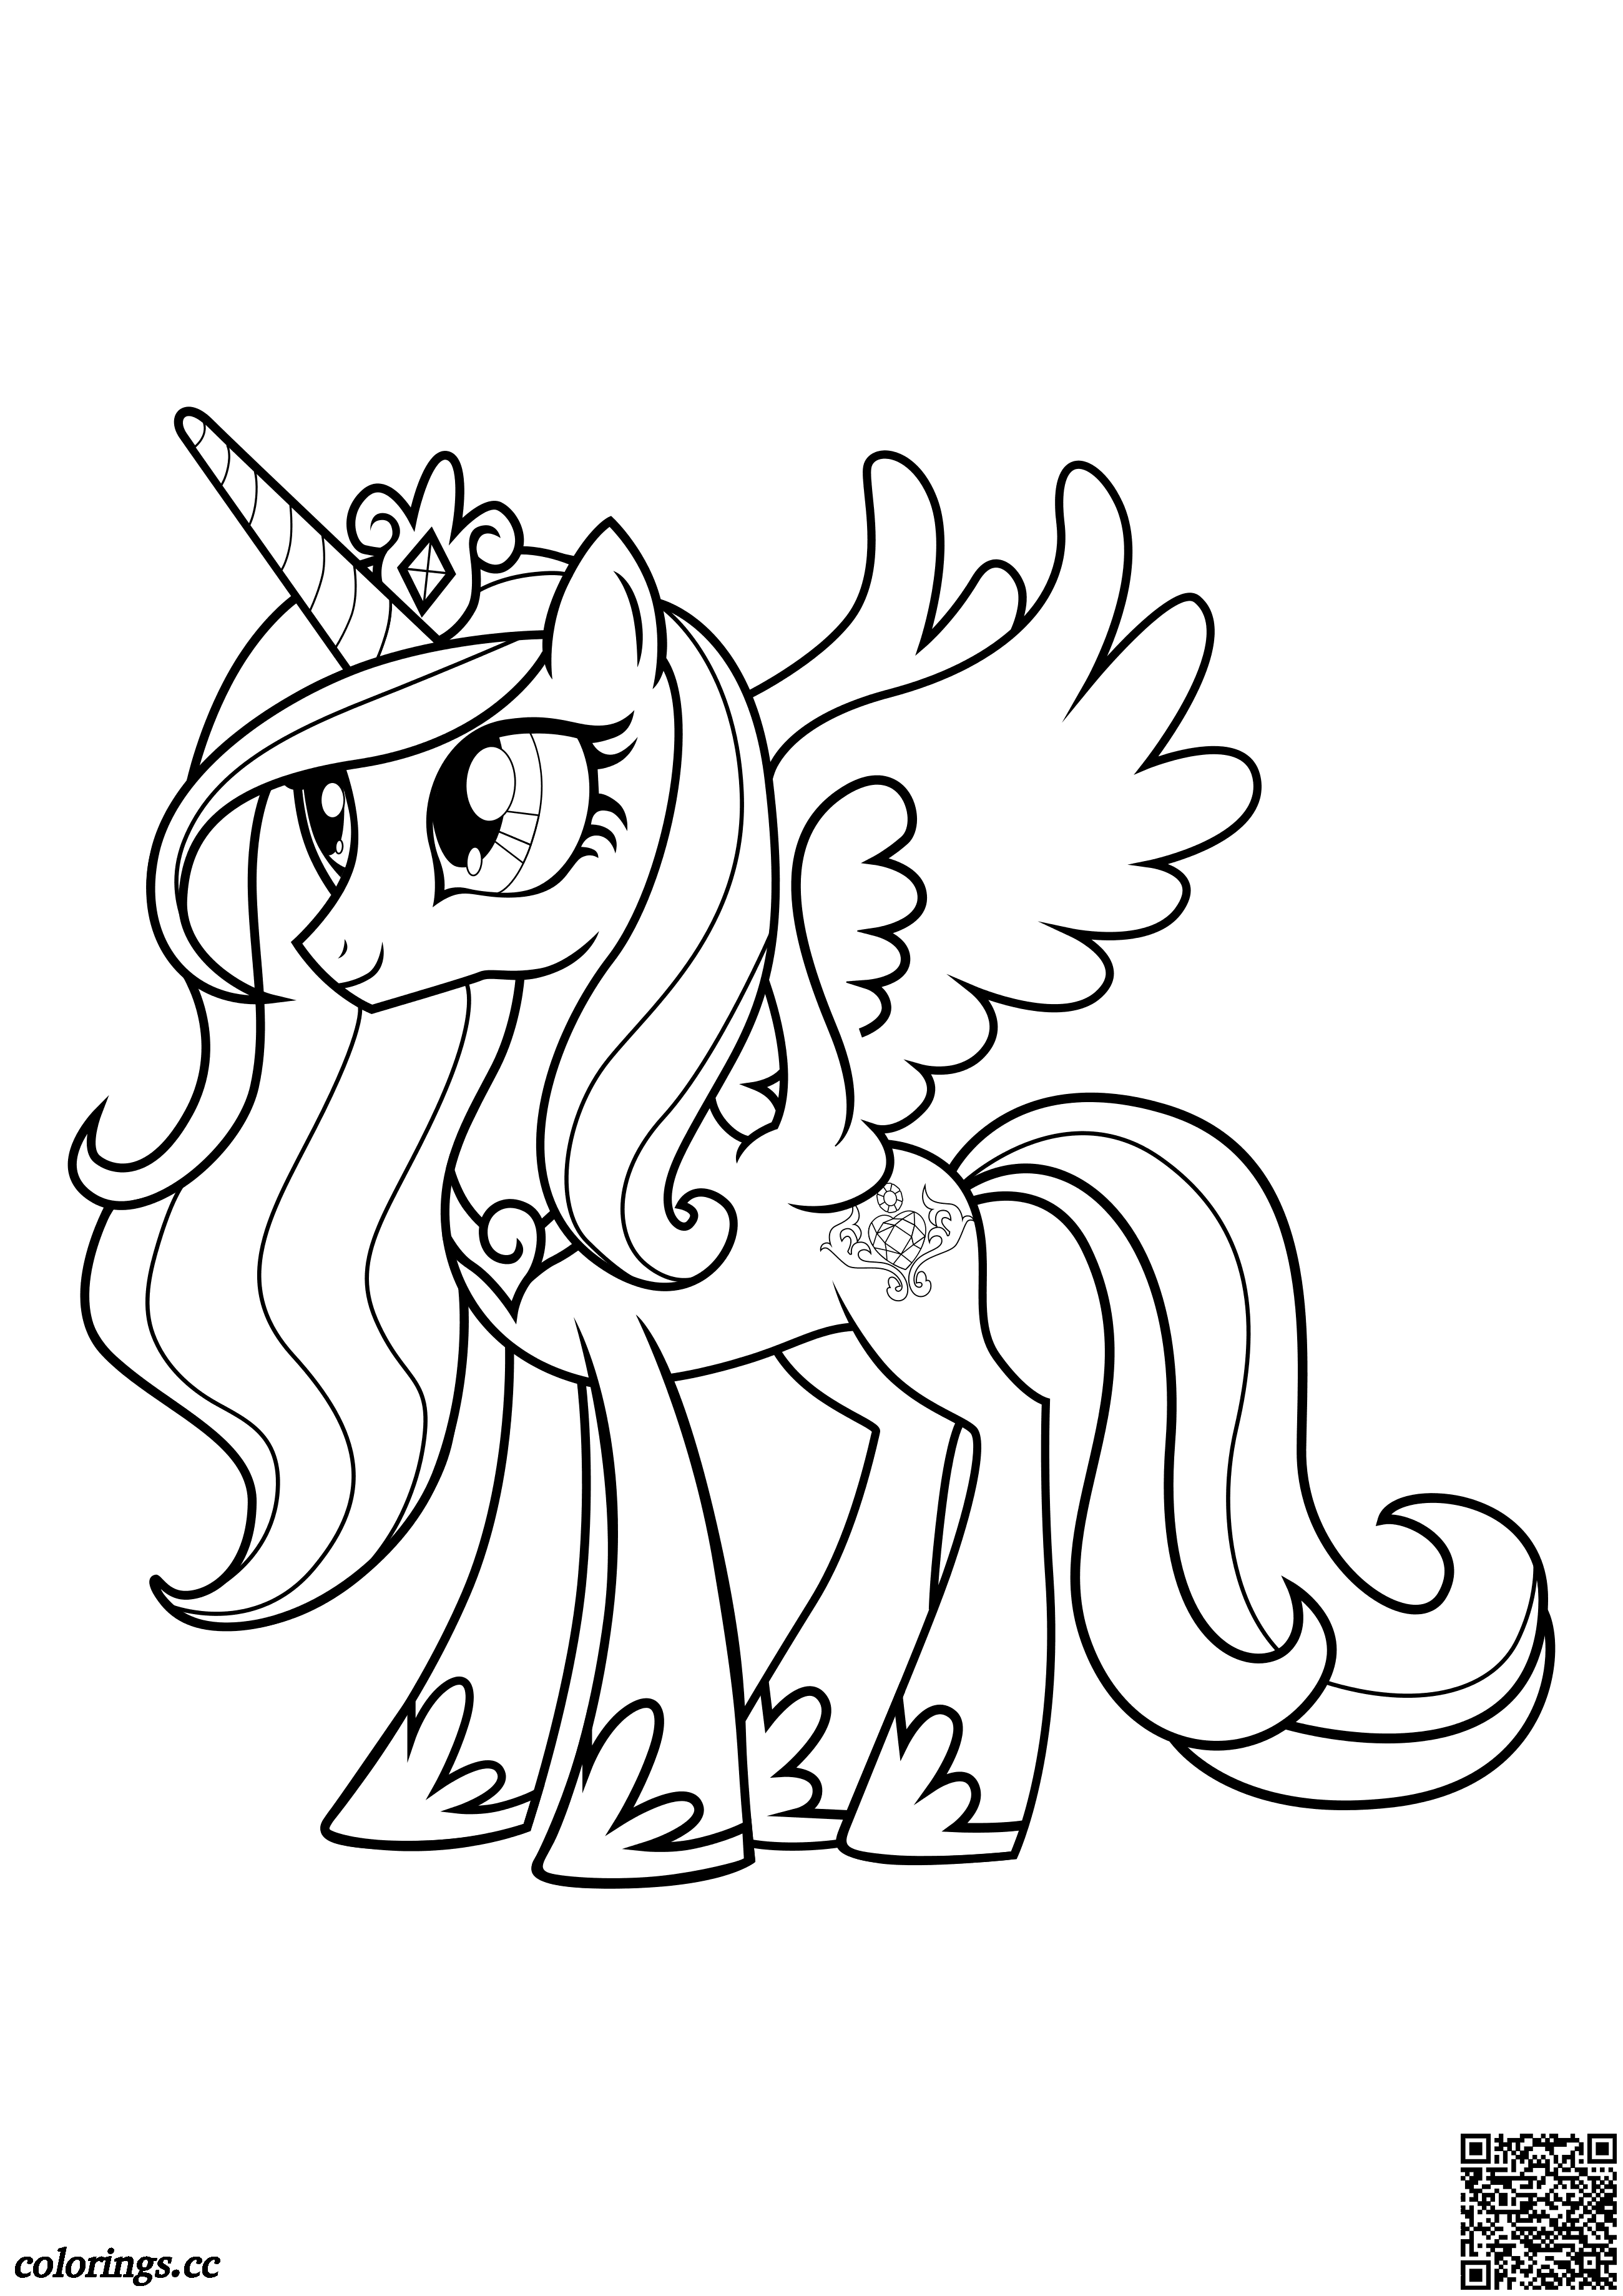 Princess cadance coloring pages my little pony friendship is magic coloring pages